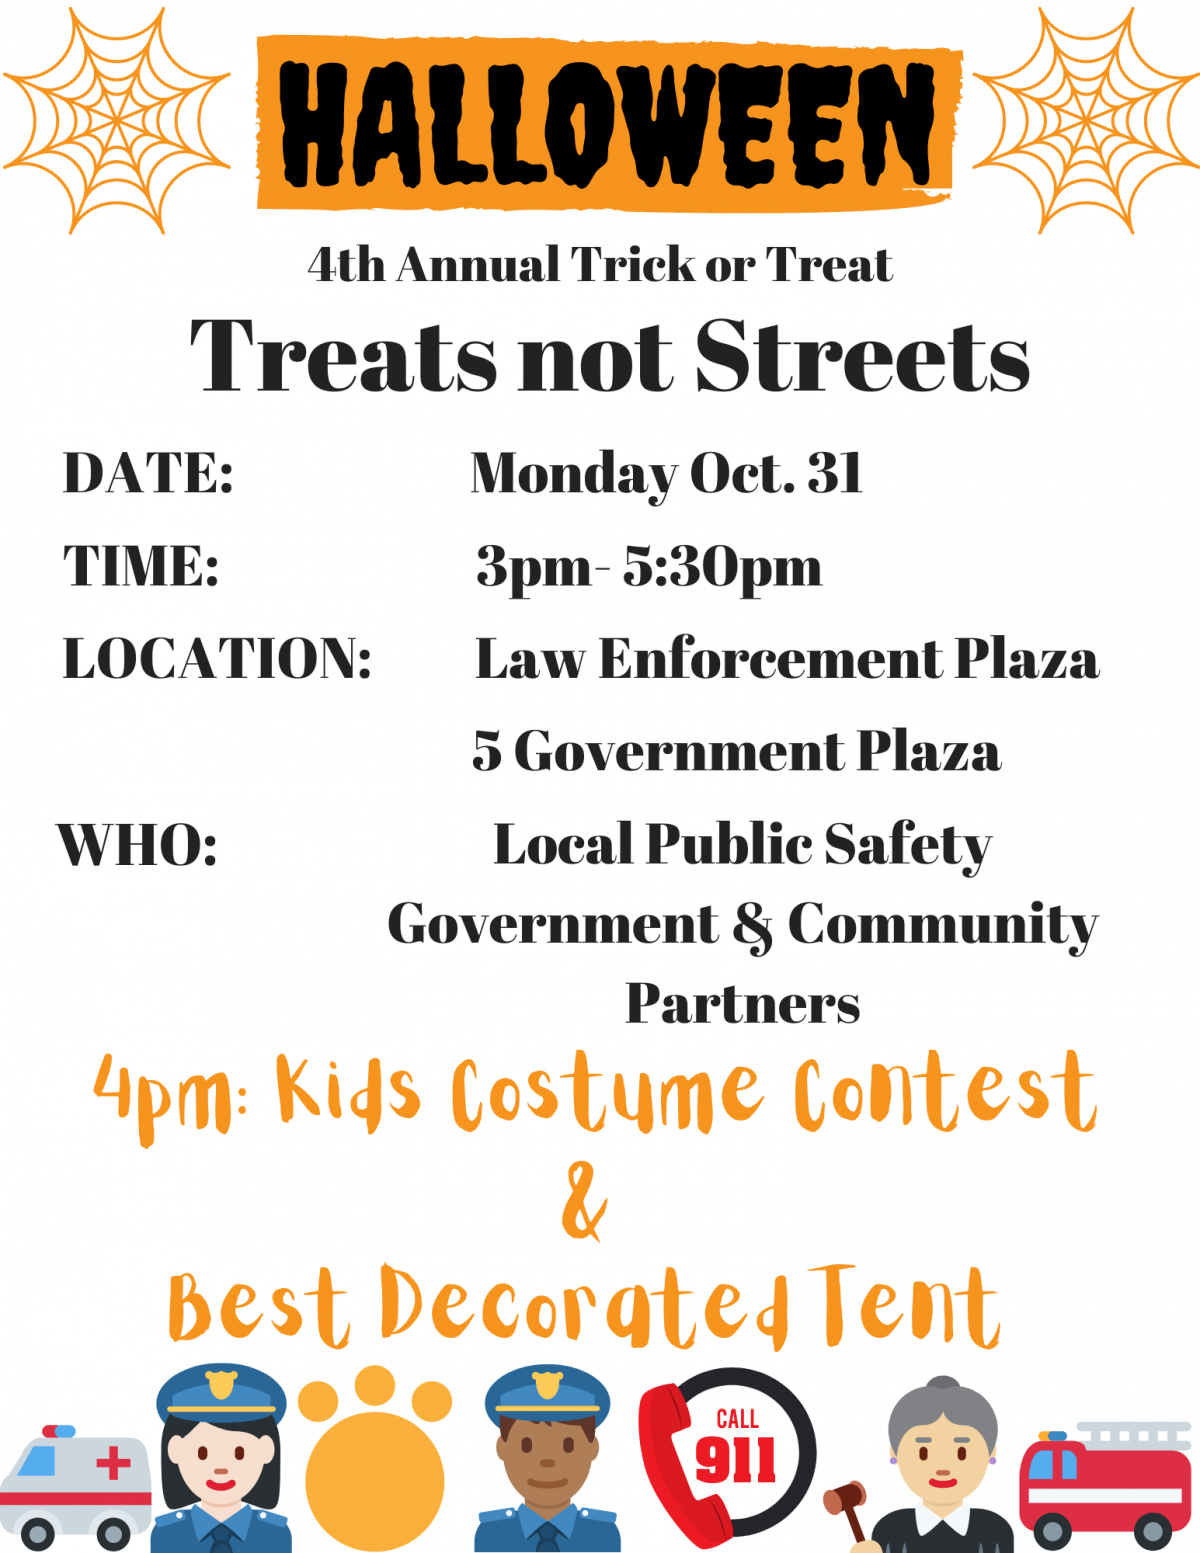 Treats not Streets - Halloween 4th Annual Trick or Treat Event